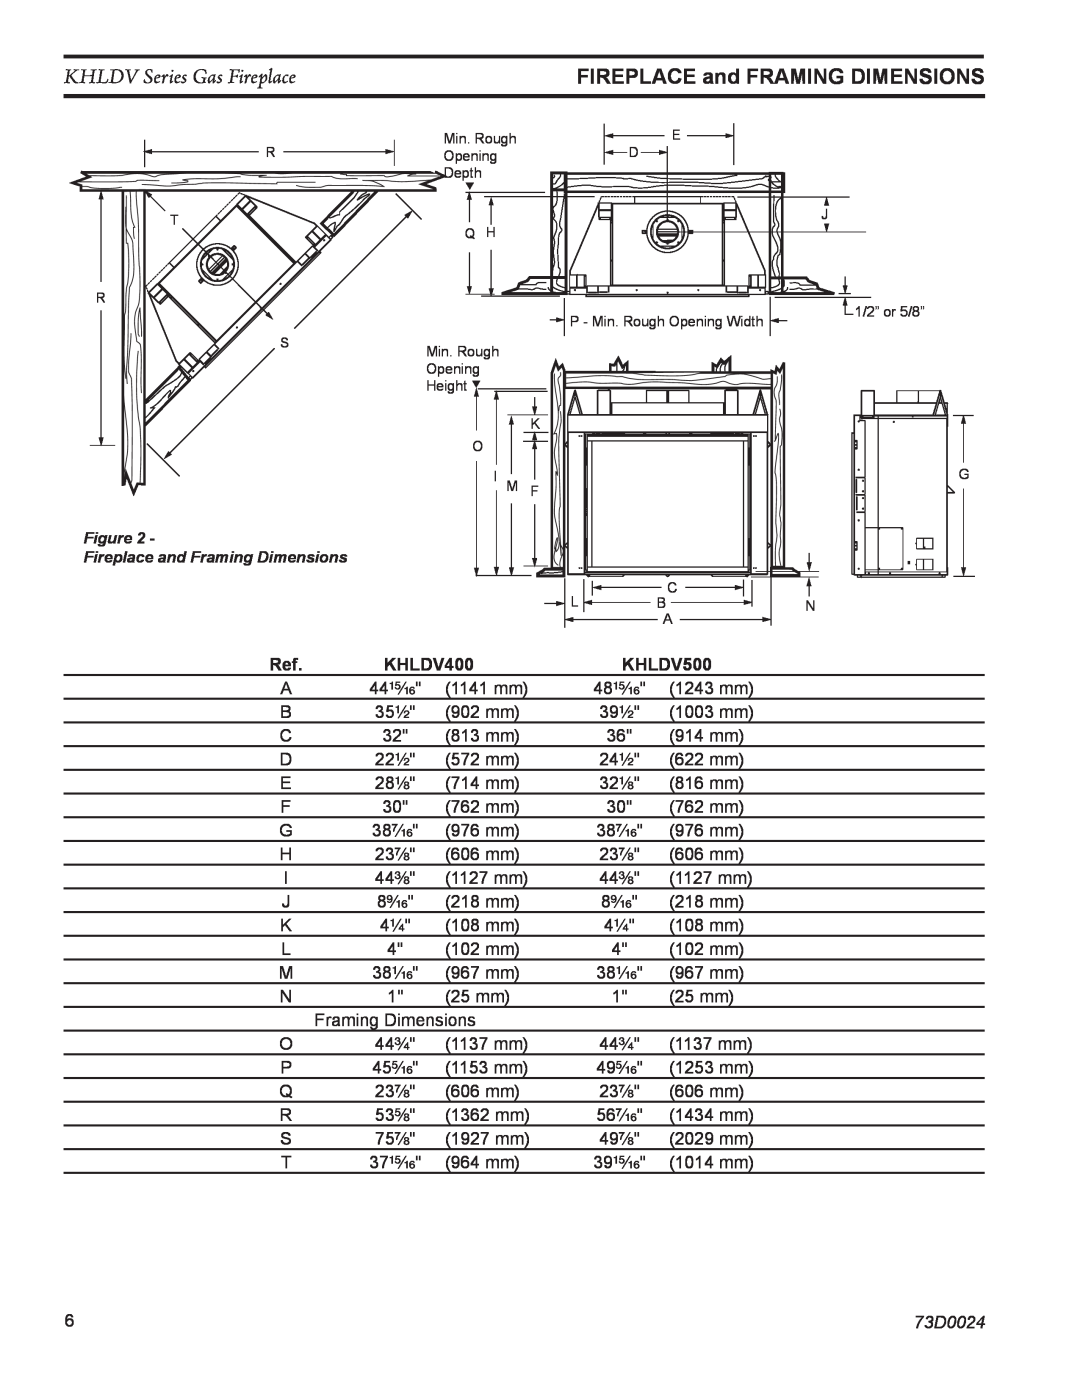 Monessen Hearth KHLDV500 KHLDV Series Gas Fireplace, FIREPLACE and FRAMING DIMENSIONS, KHLDV400, 73D0024 